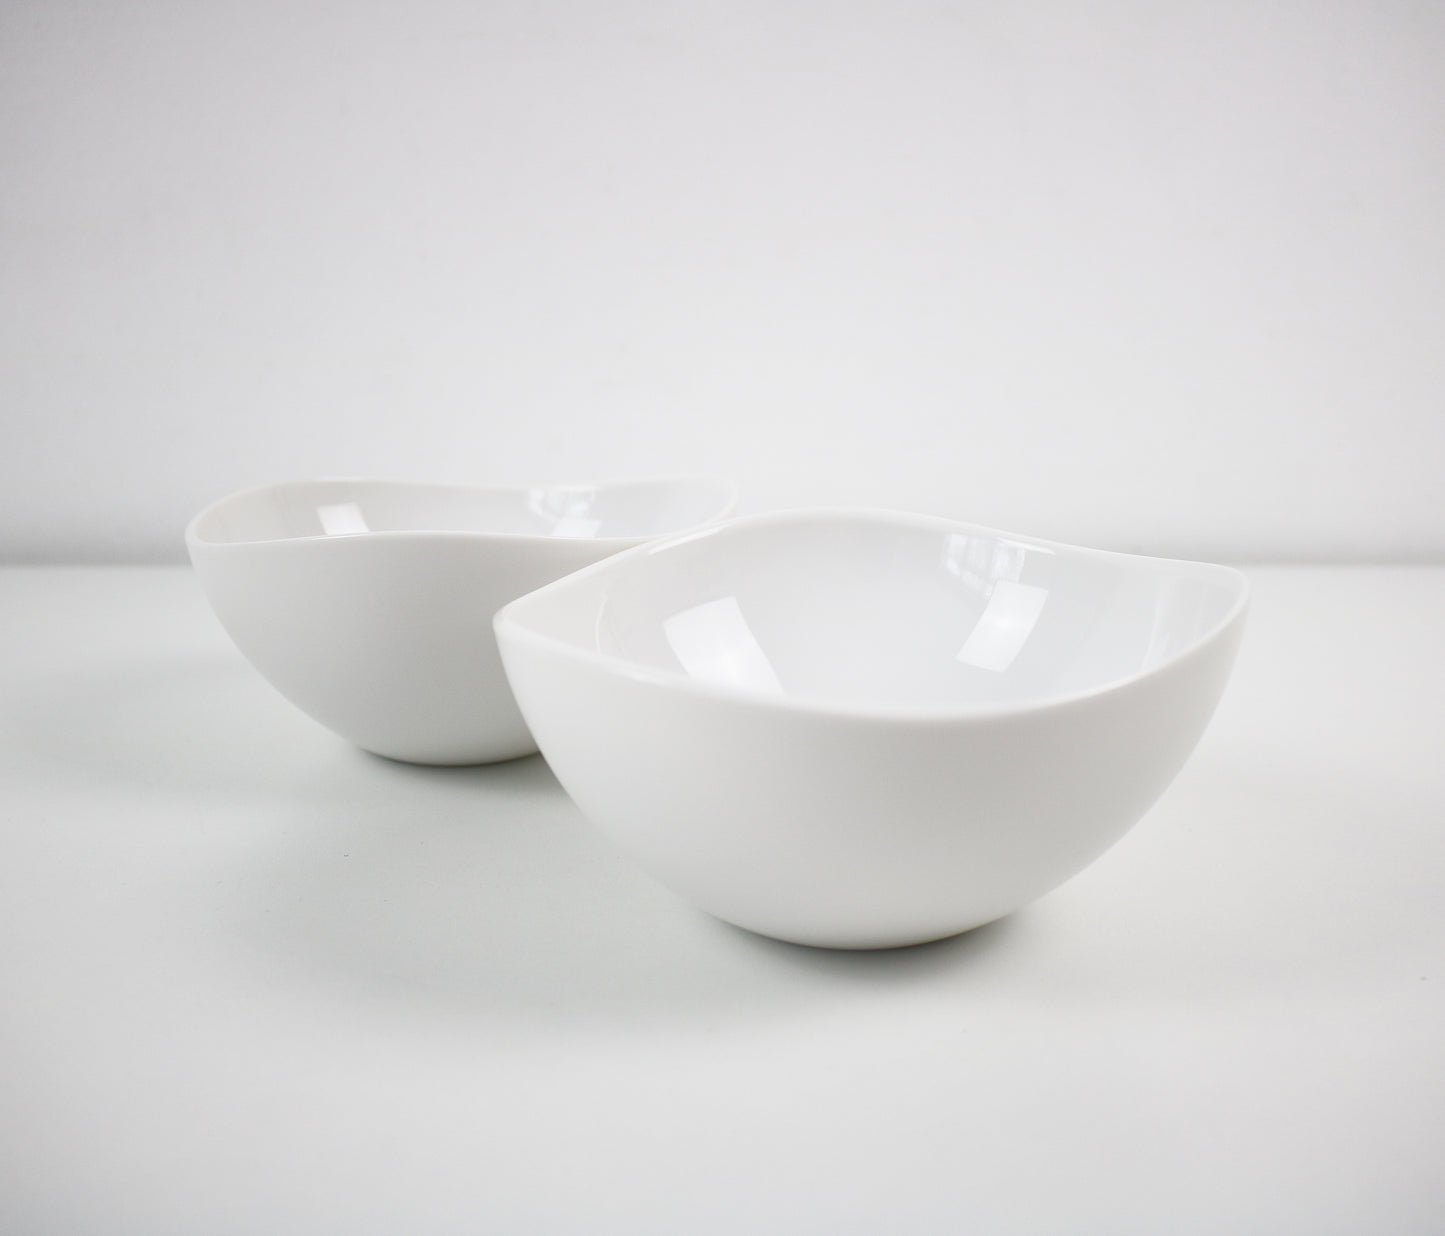 Wovo set of 3 serving bowls - white. Unused early 2000s vintage stock